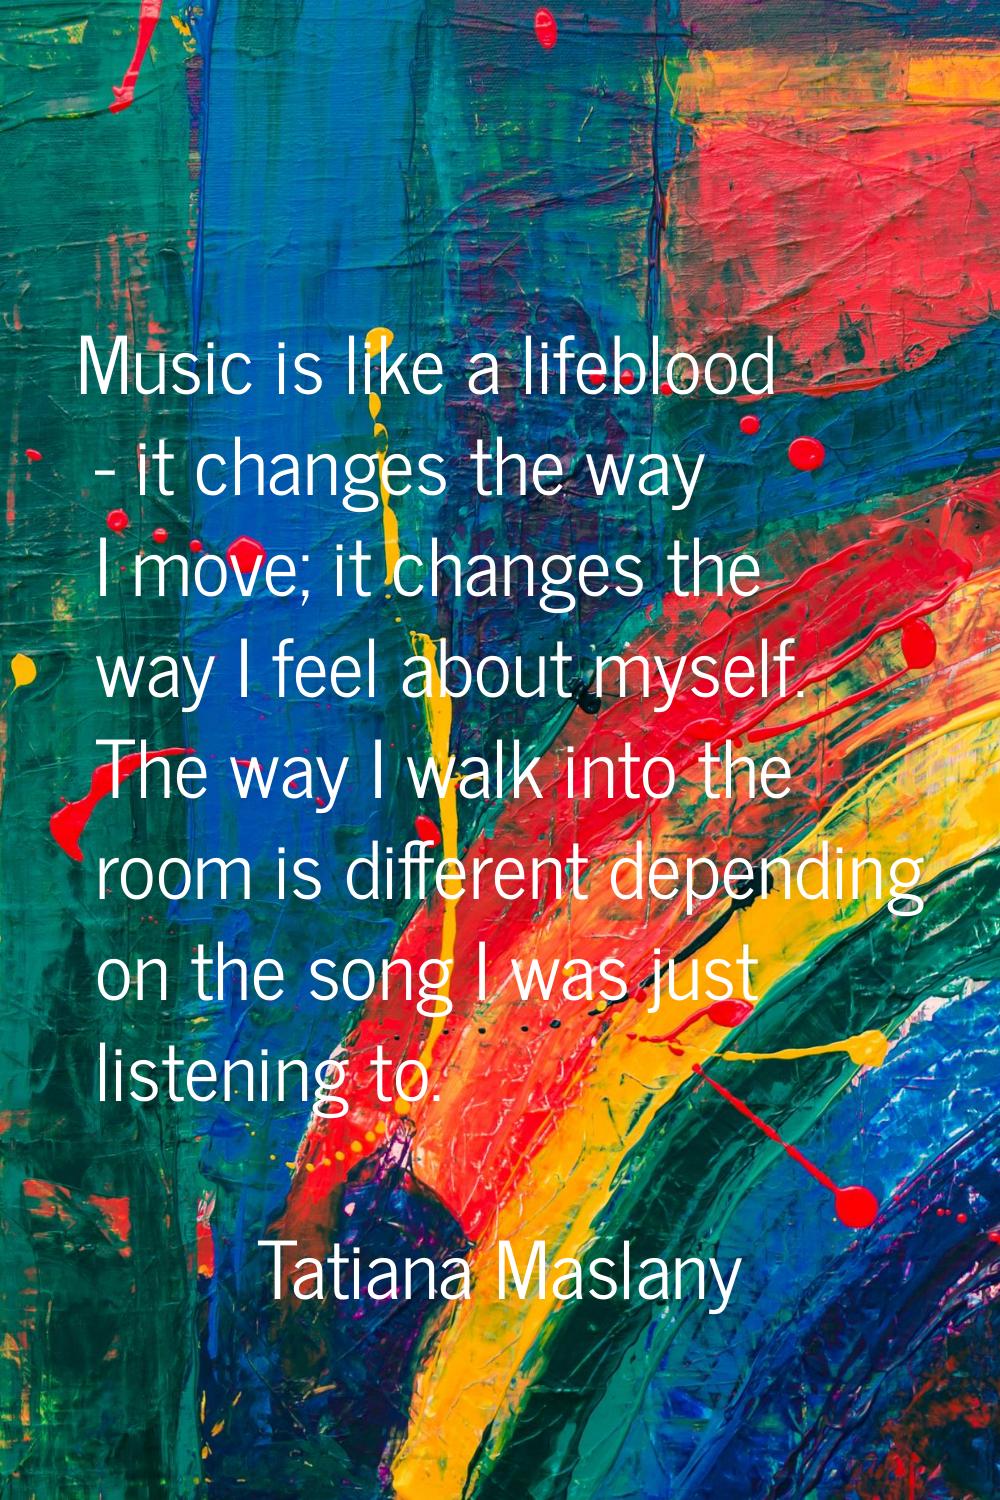 Music is like a lifeblood - it changes the way I move; it changes the way I feel about myself. The 